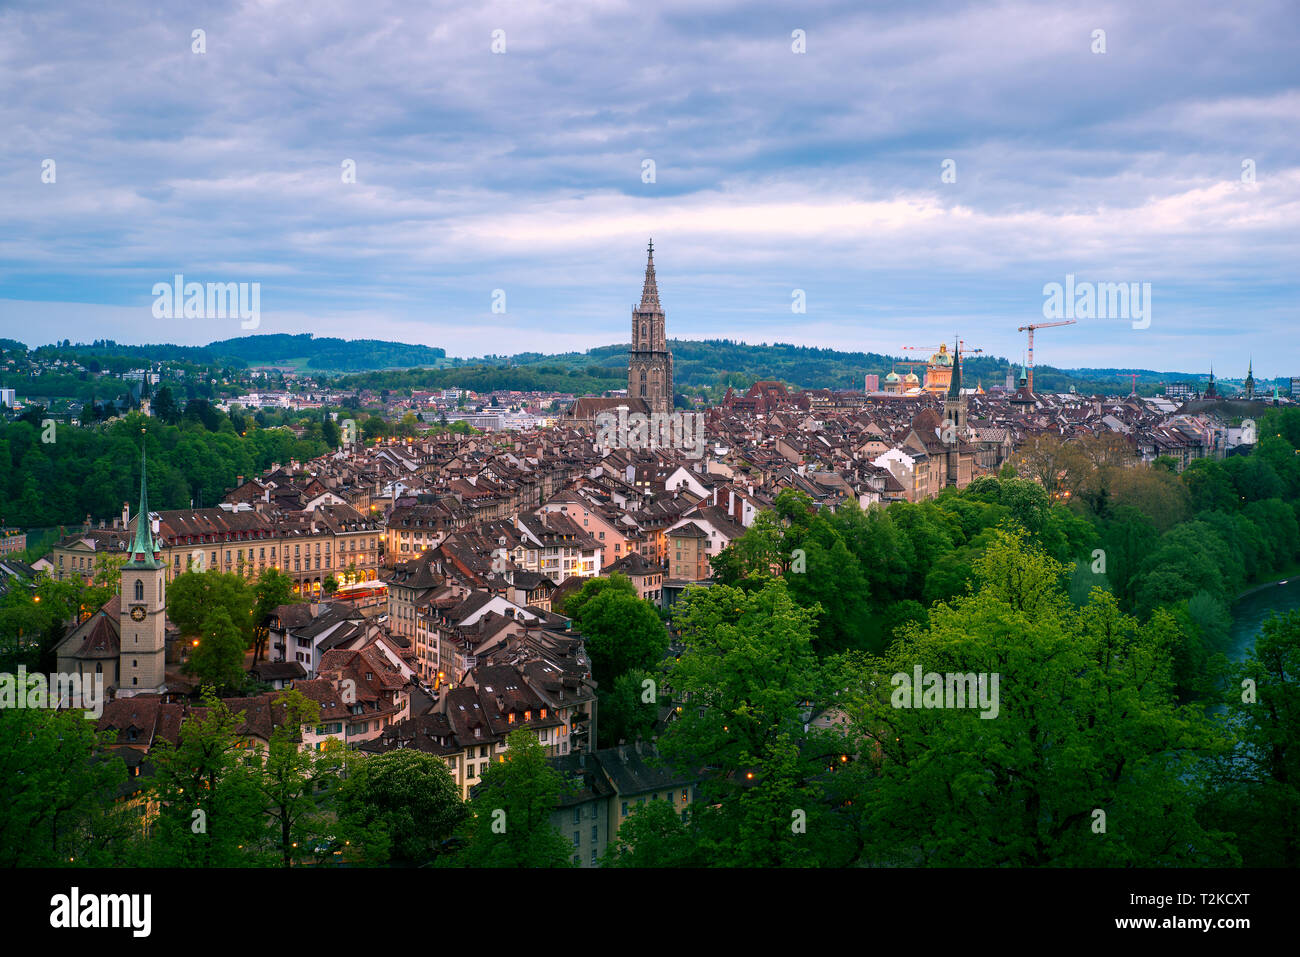 Aerial view of the Bern old town with the Aare river flowing around the town at night in Bern, Switzerland. Stock Photo